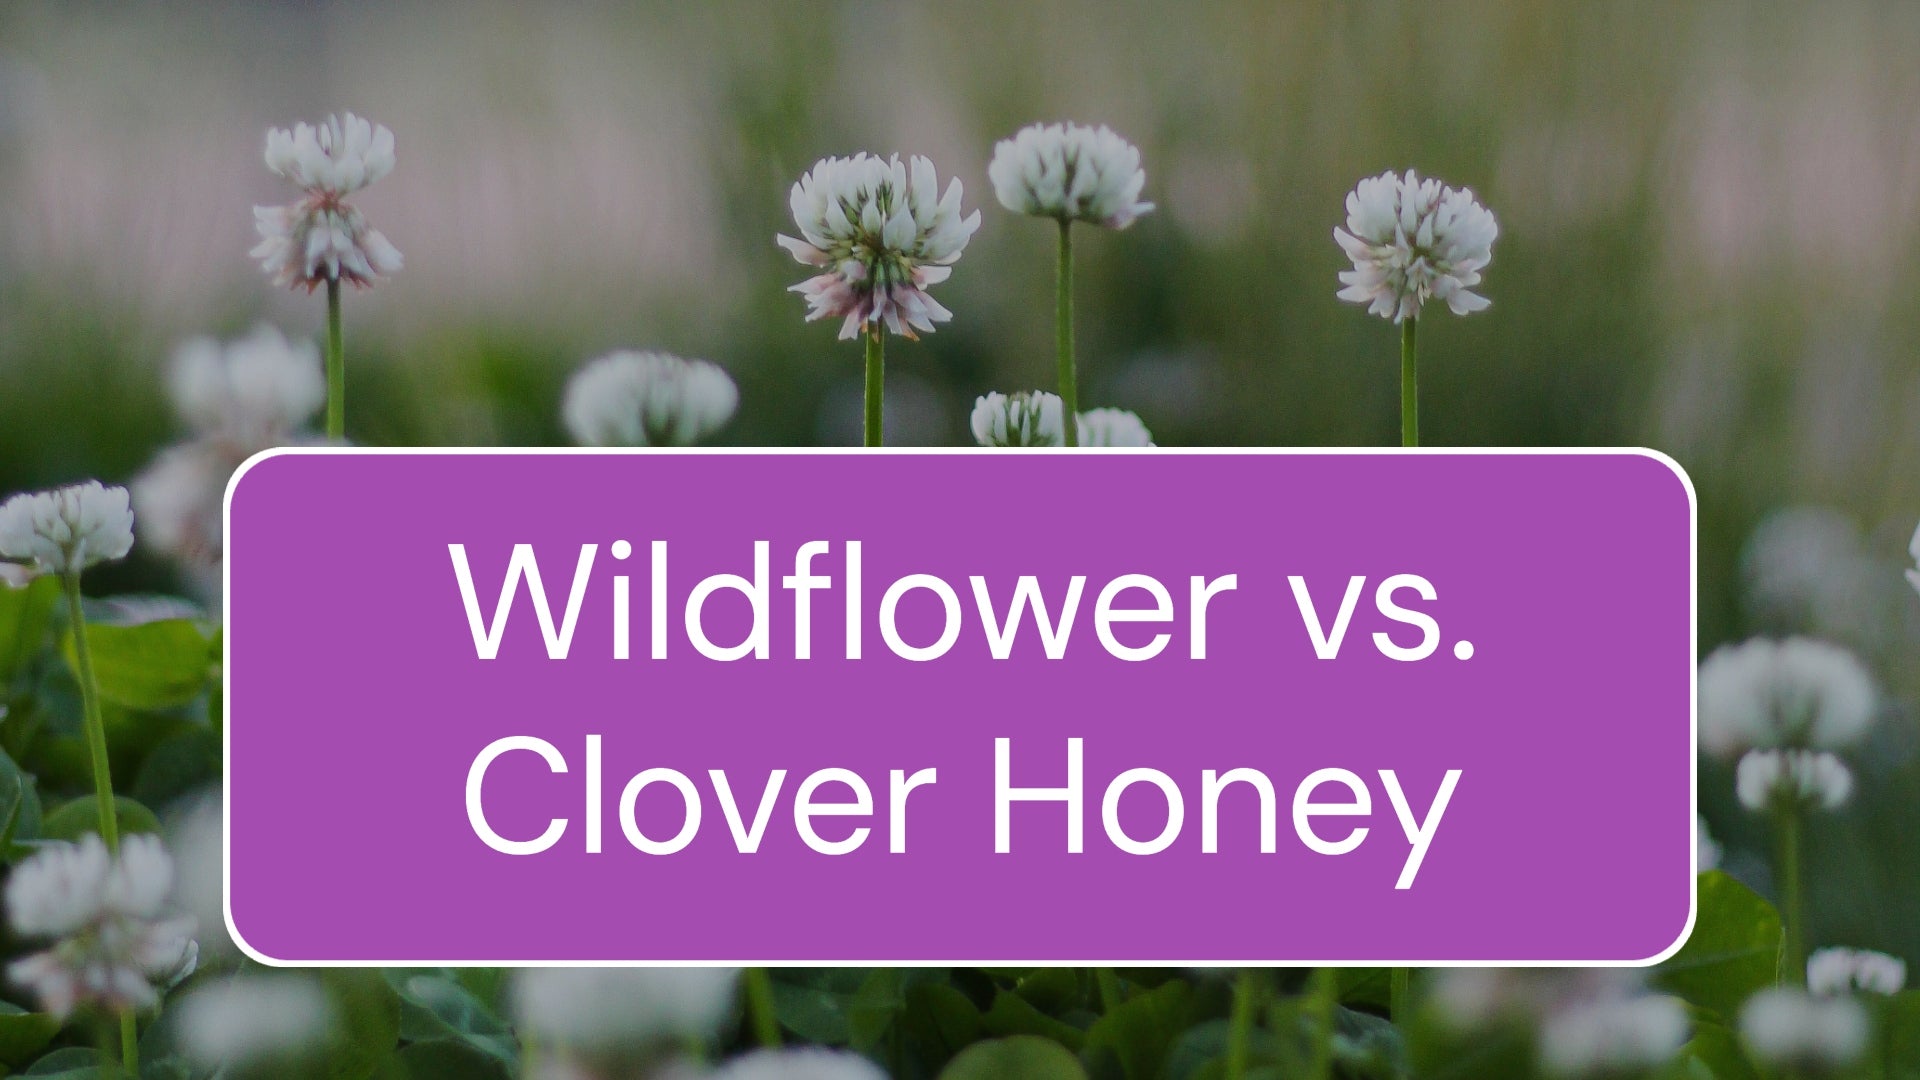 What Are The Differences Between Wildflower Honey and Clover Honey?